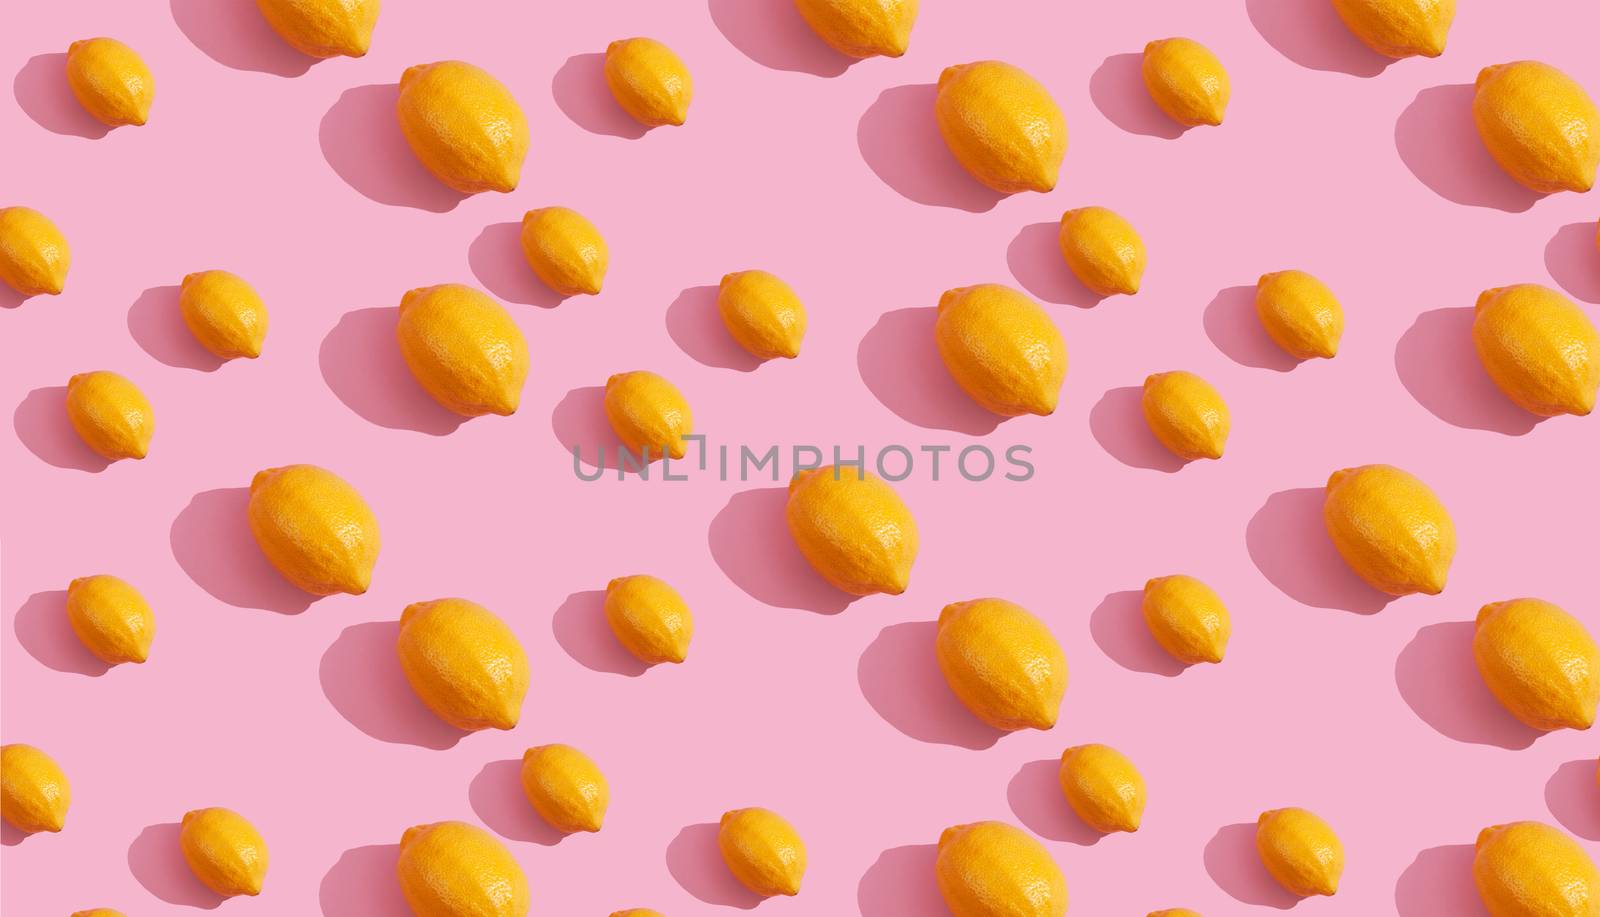 Seamless continuous pattern of yellow lemons on pink background. Minimalist concept of fresh citrus fruit by polyats